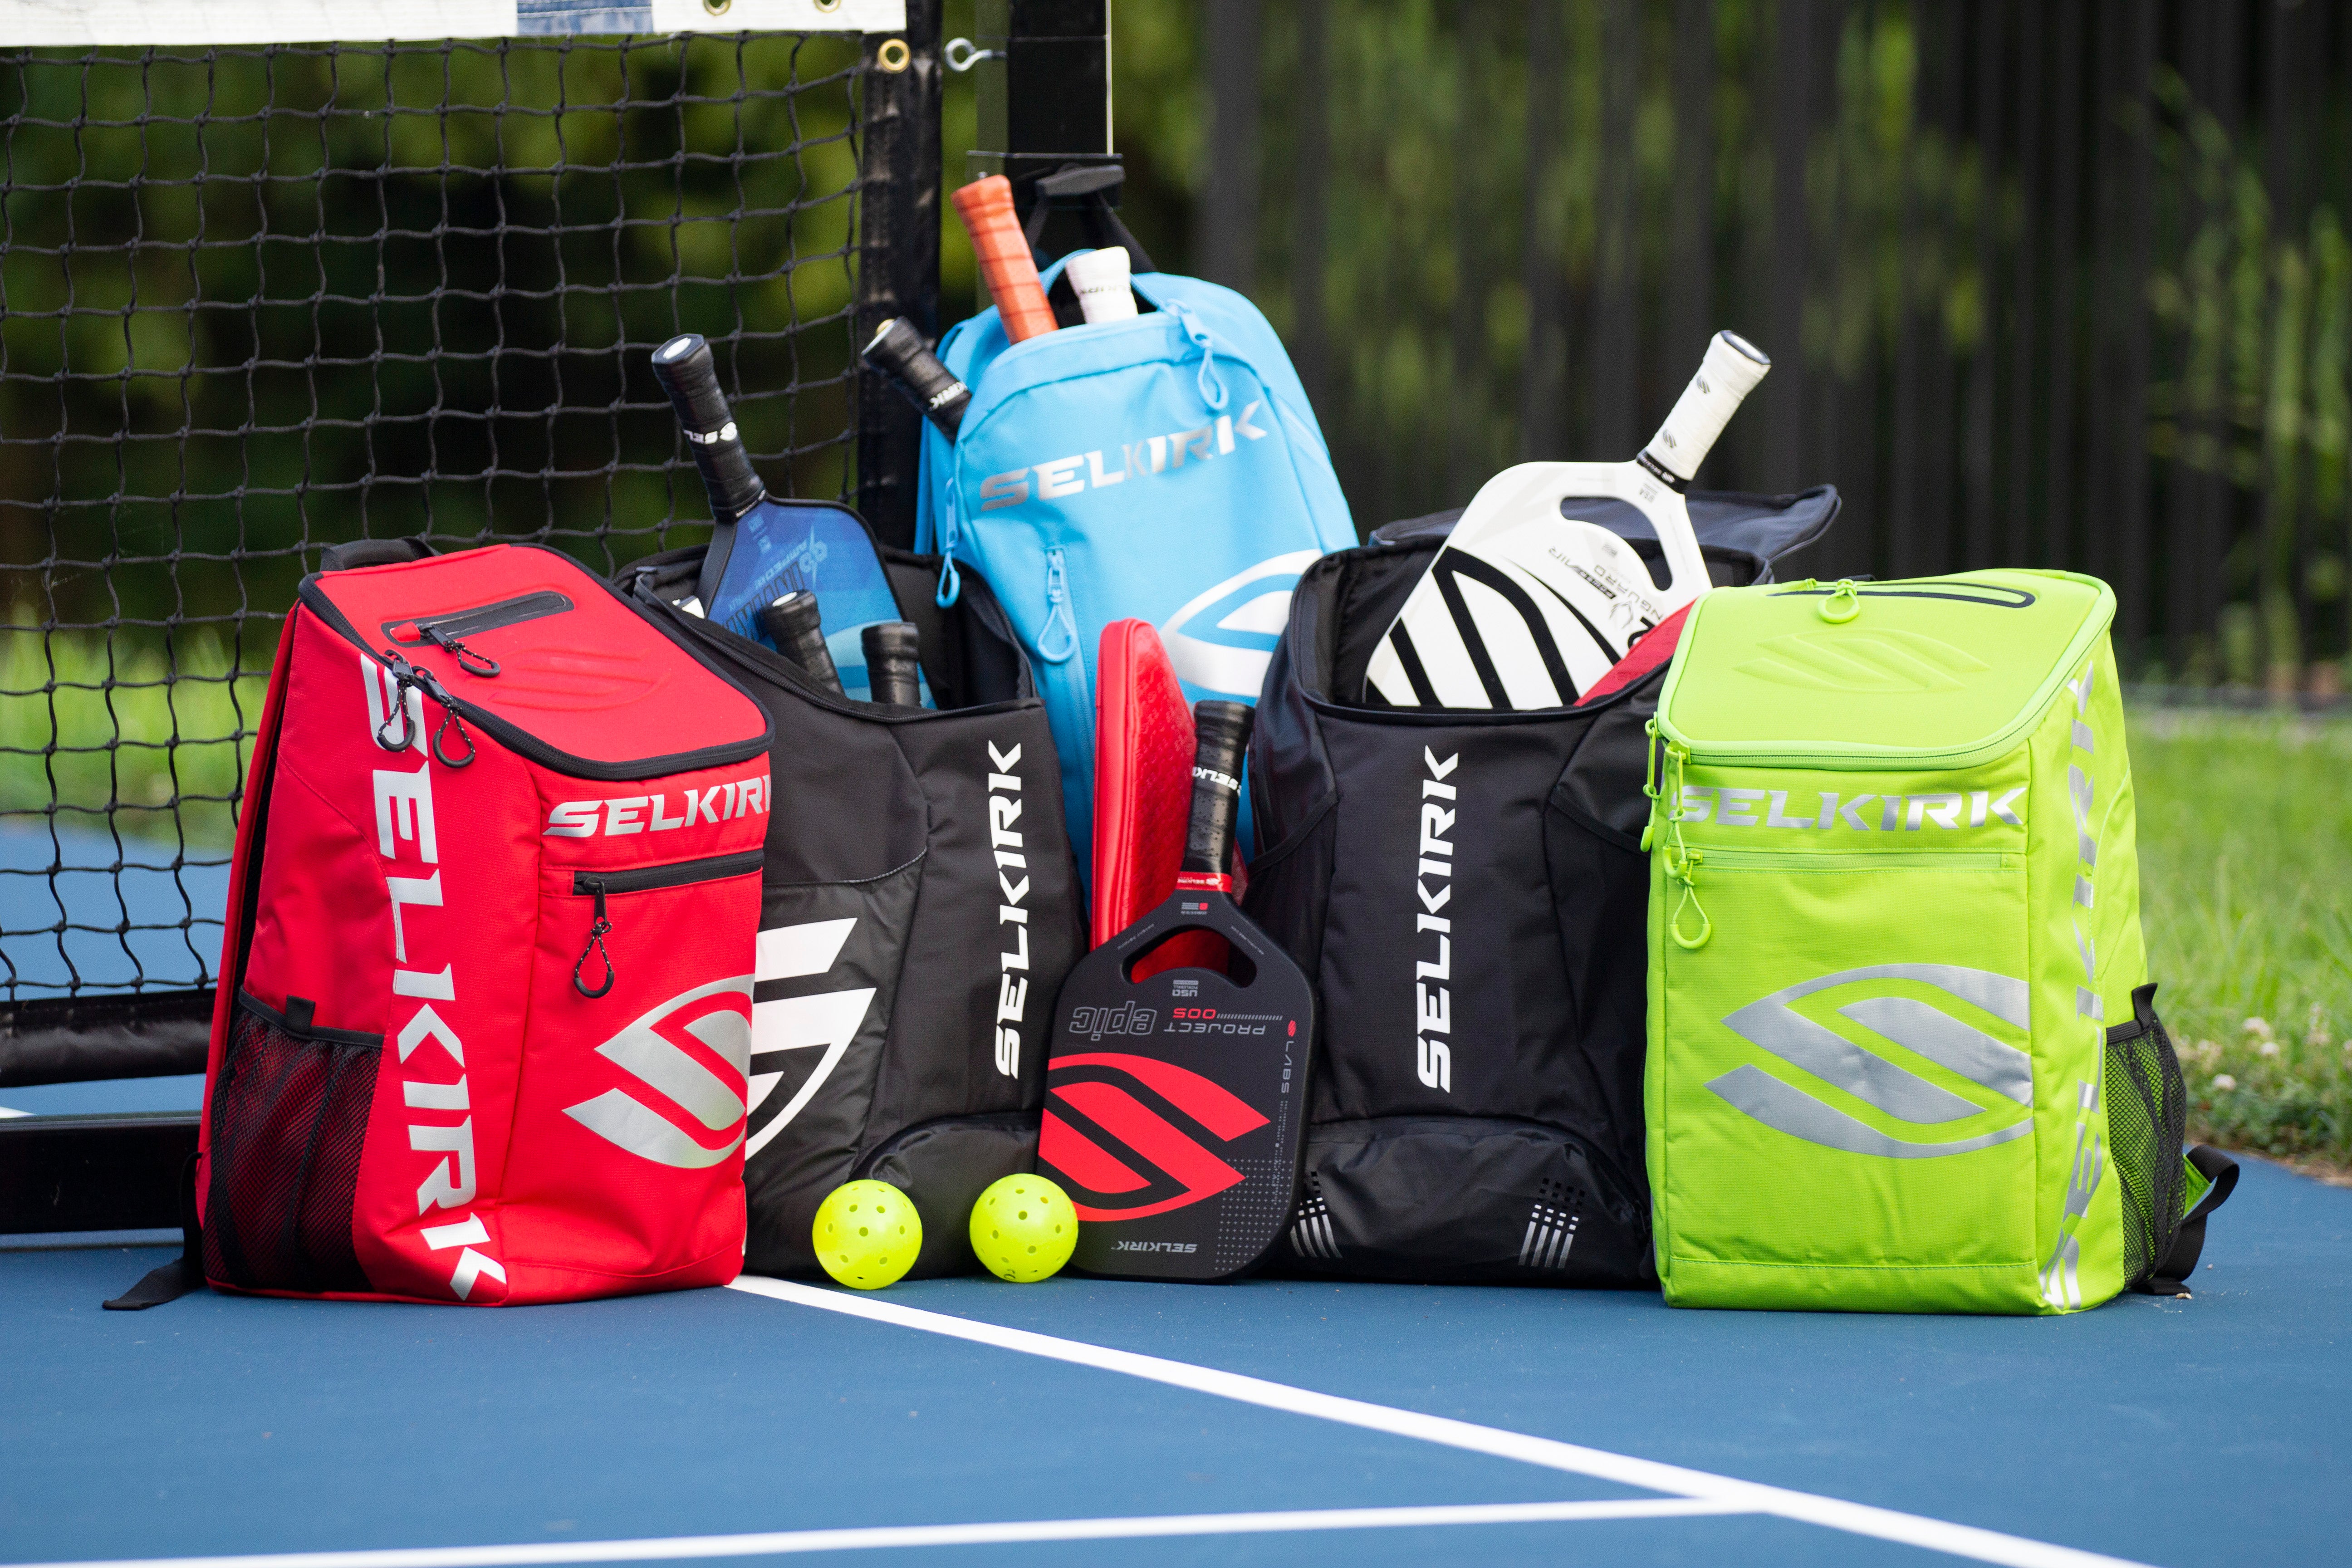 5 different pickleball bags on a pickleball court